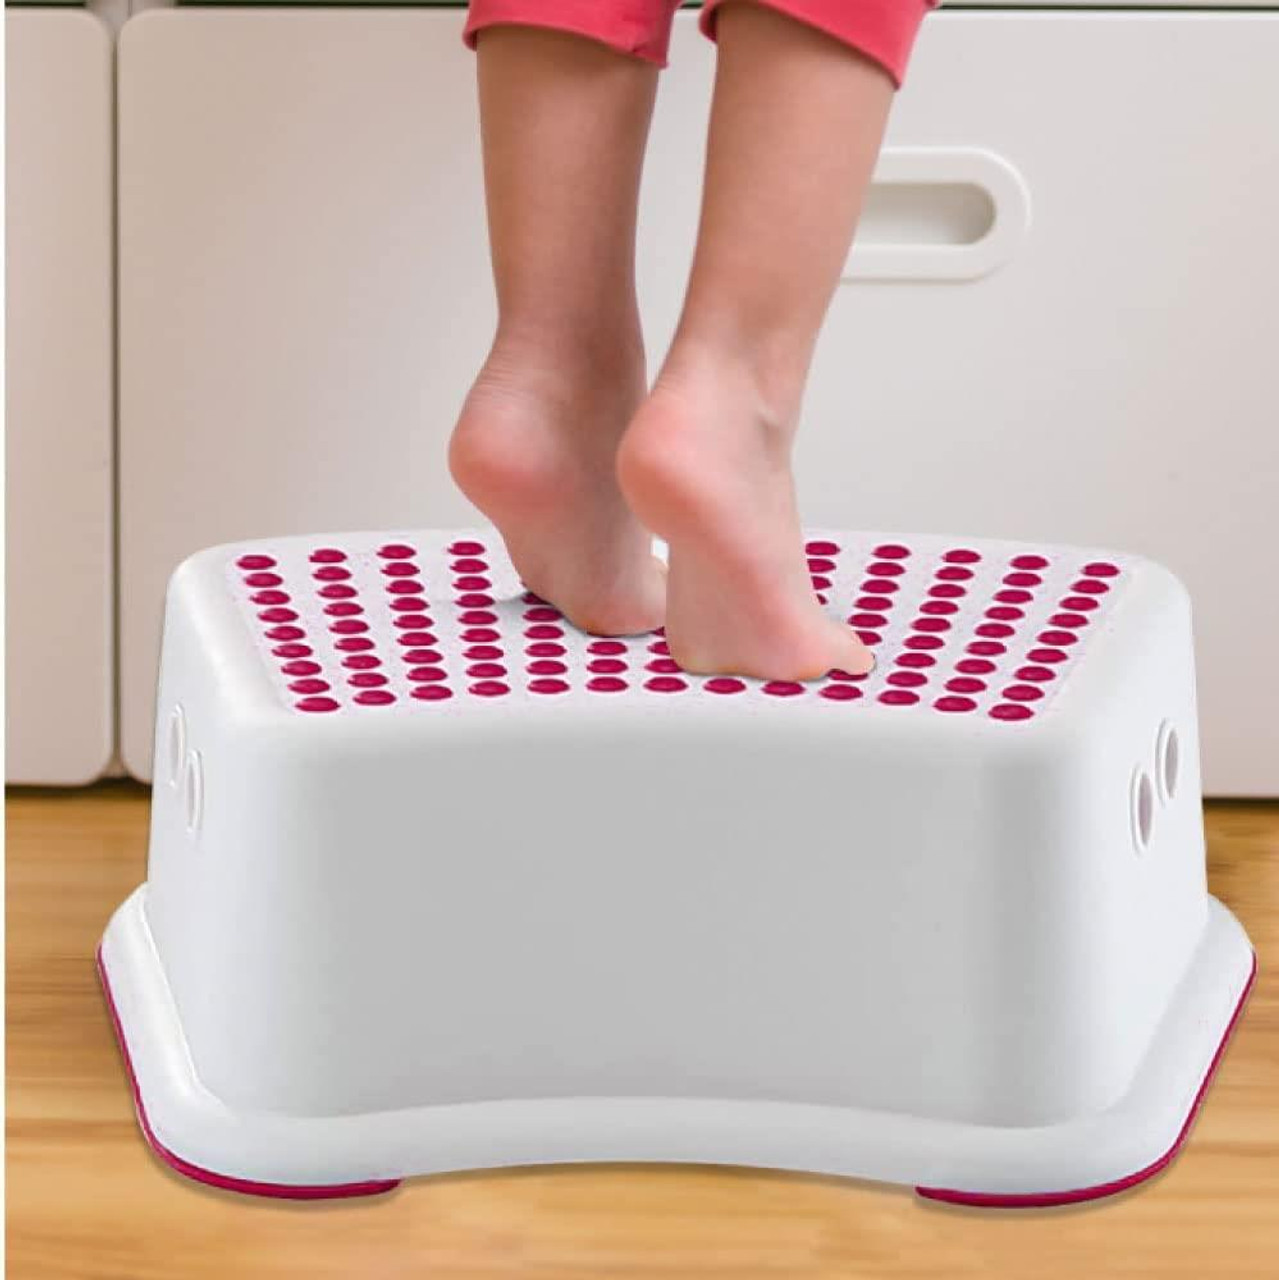 SPICOM Plastic Child Foot Step Stool Anti-Slip Cover on Top With For Children kids with a Max Weight of 77 lb Pink /White 